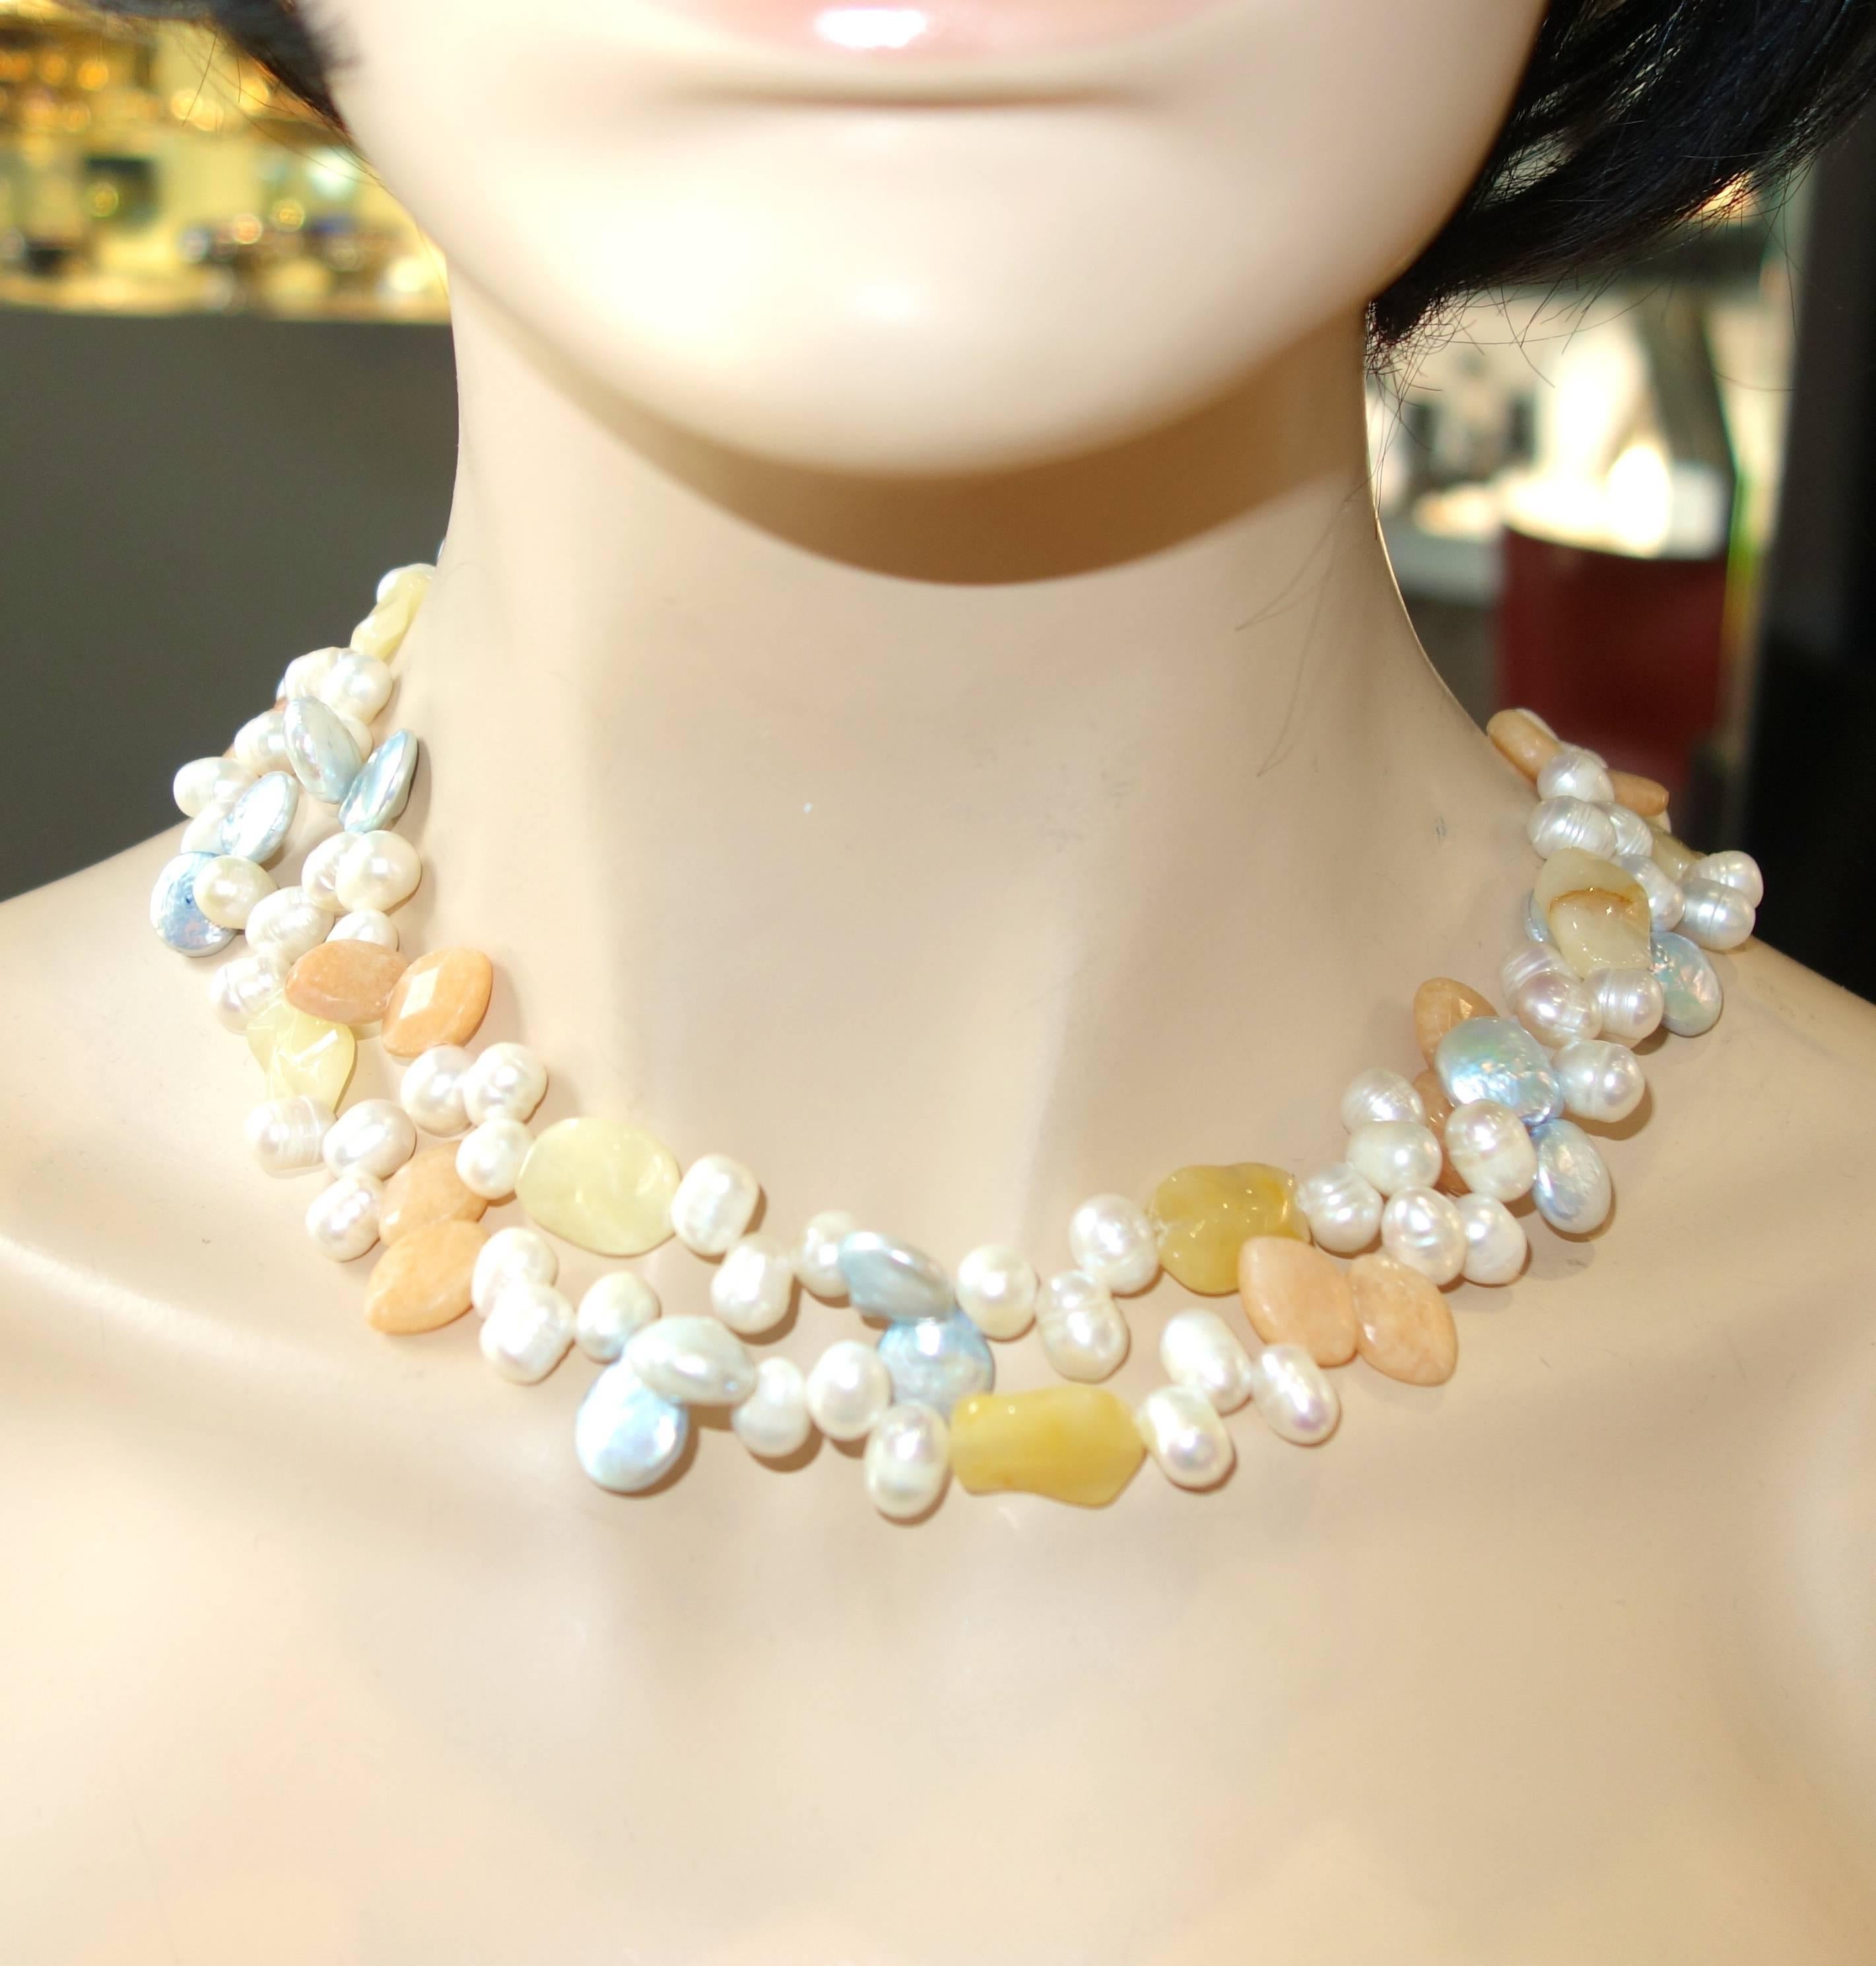 Multi color fresh water pearls strung with multi color, top faceted, agate long necklace terminating with tassles, this necklace can be "tied" and worn a number of different ways.